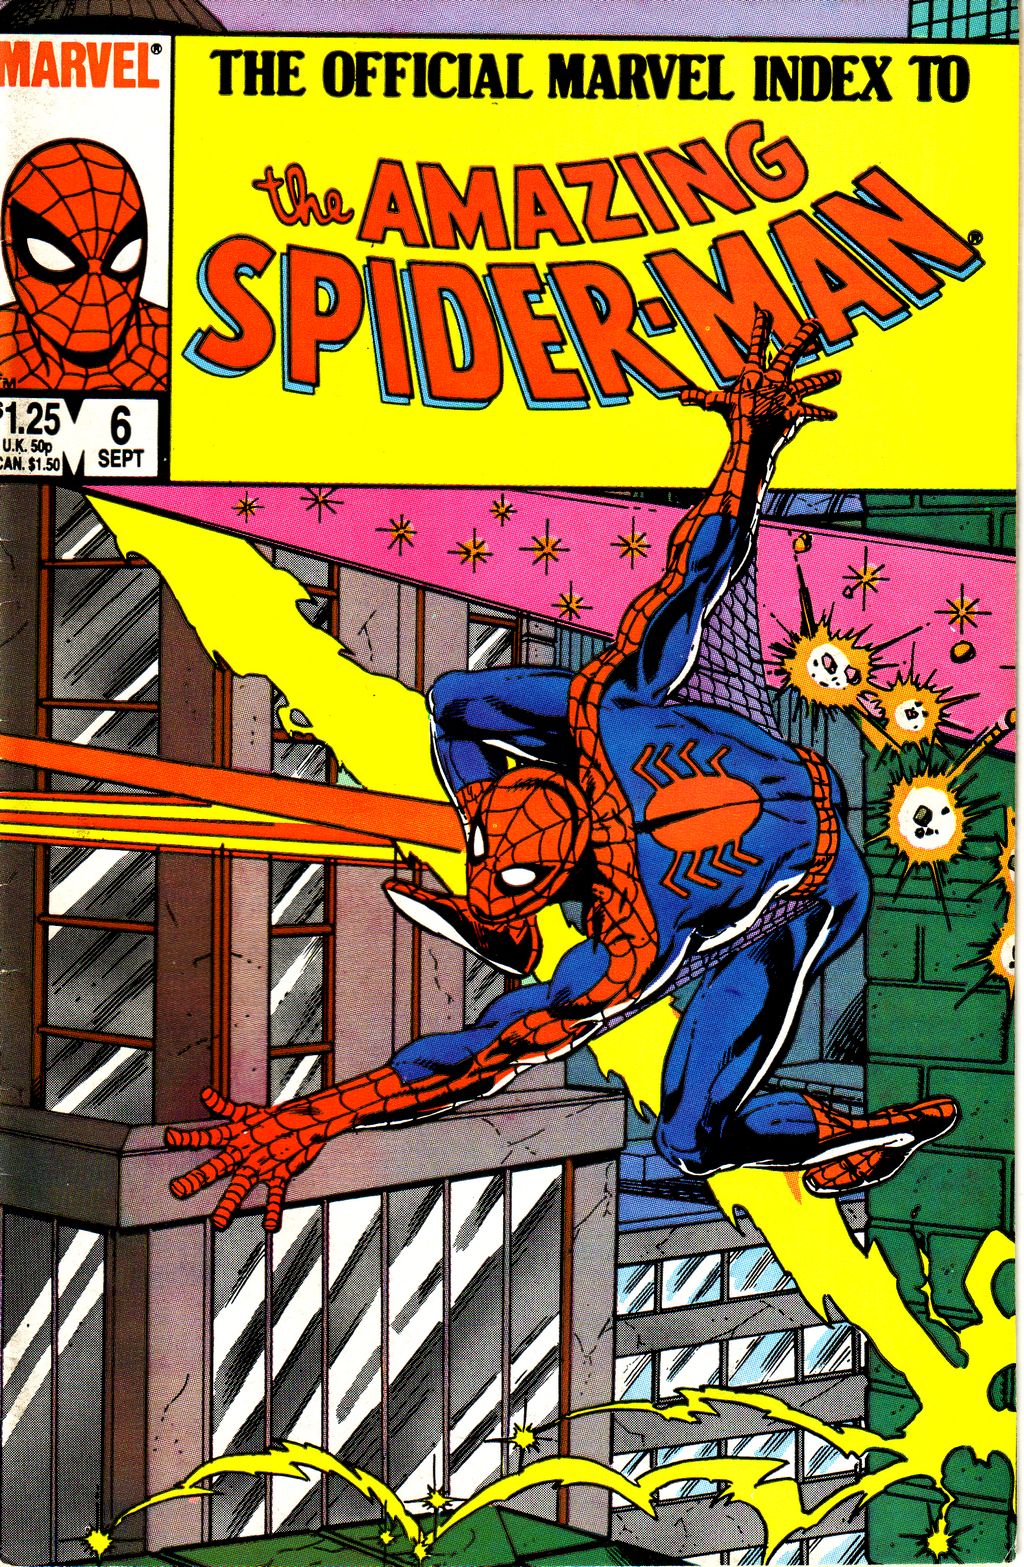 Read online The Official Marvel Index to The Amazing Spider-Man comic -  Issue #6 - 1